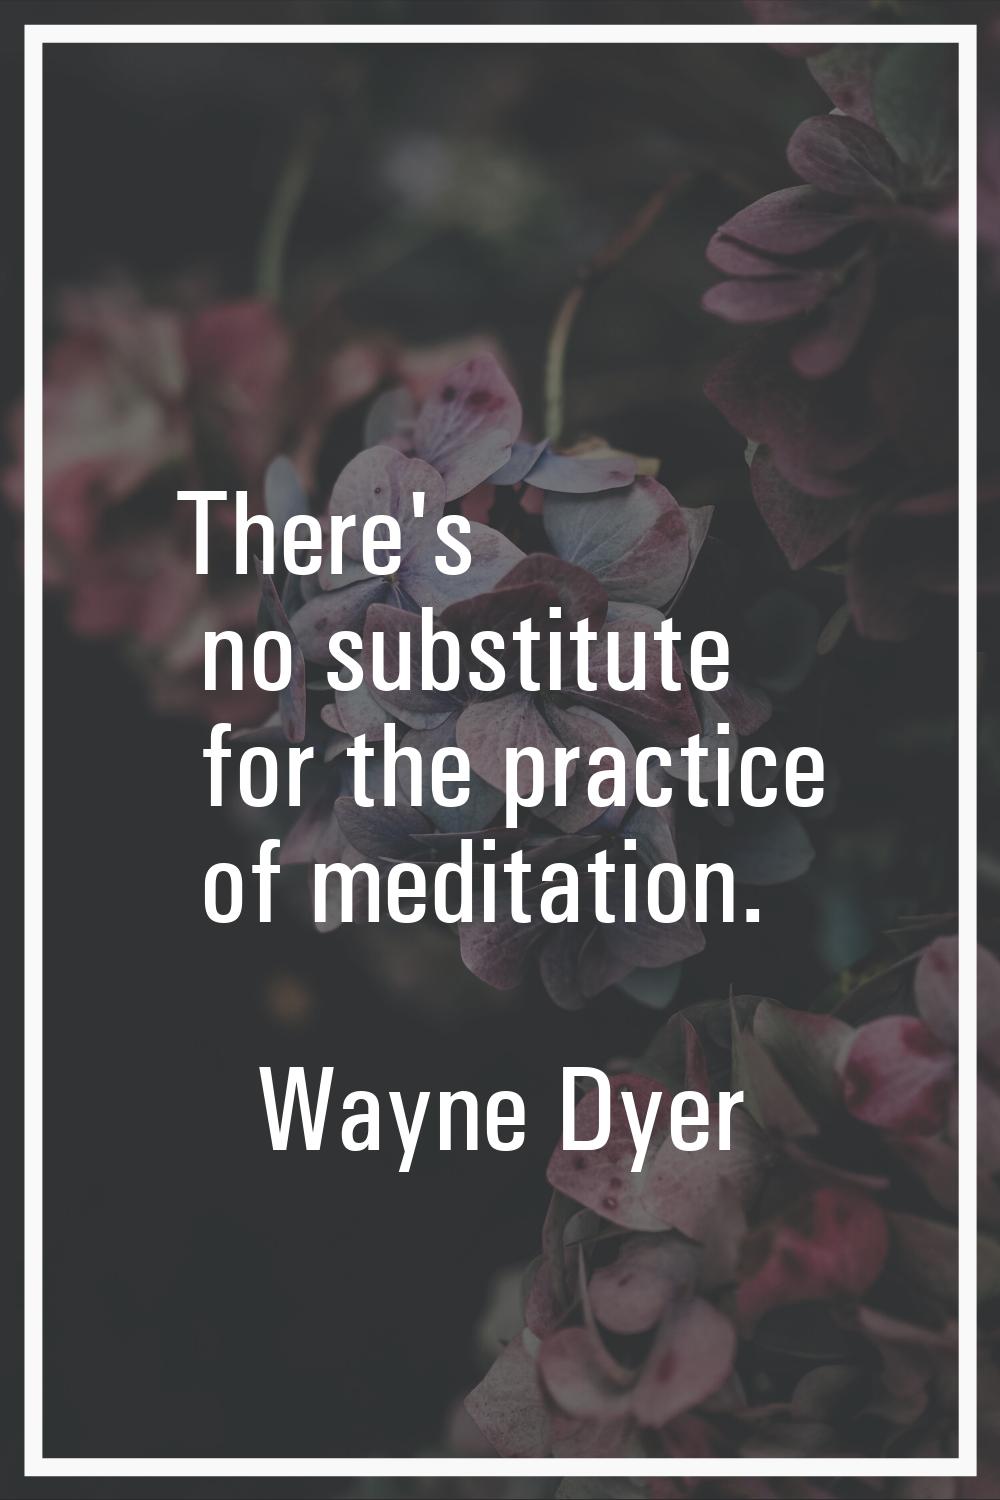 There's no substitute for the practice of meditation.